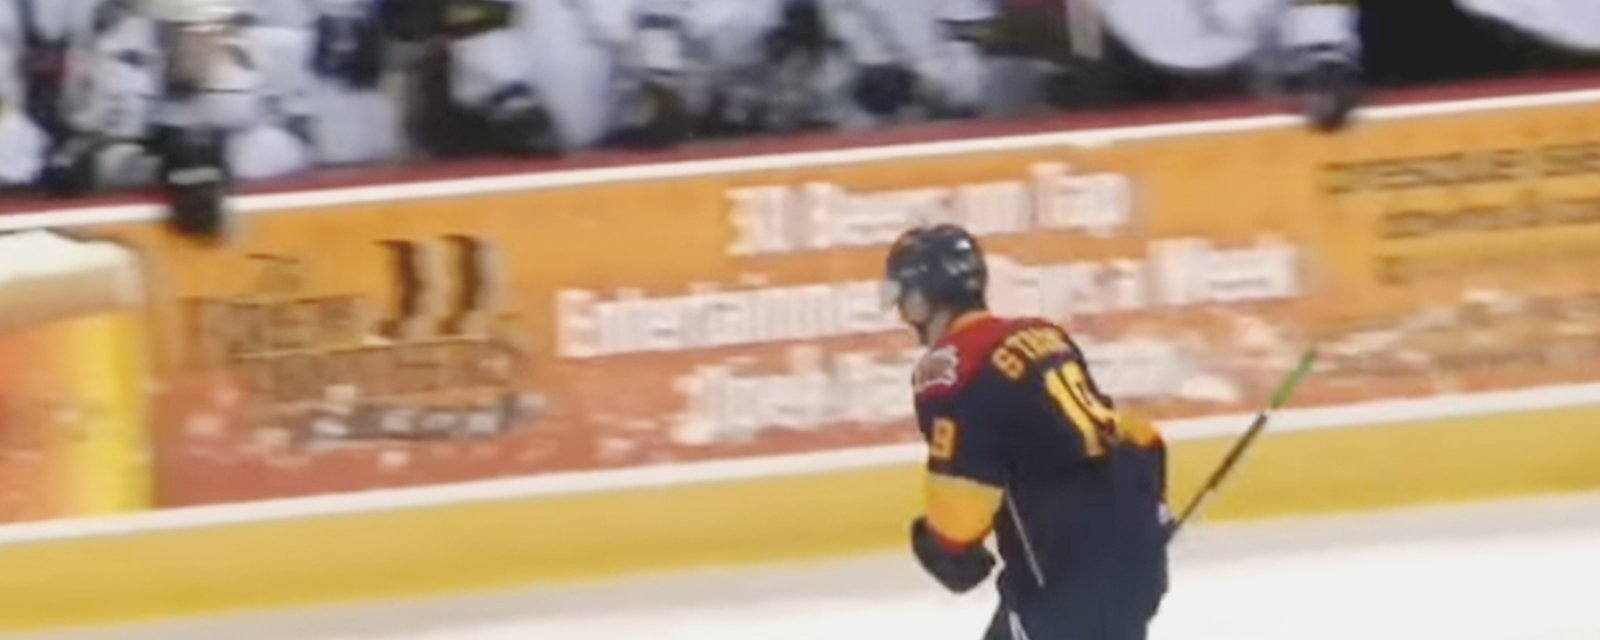 Gotta see it : Player steals his opponent stick and then score goal.